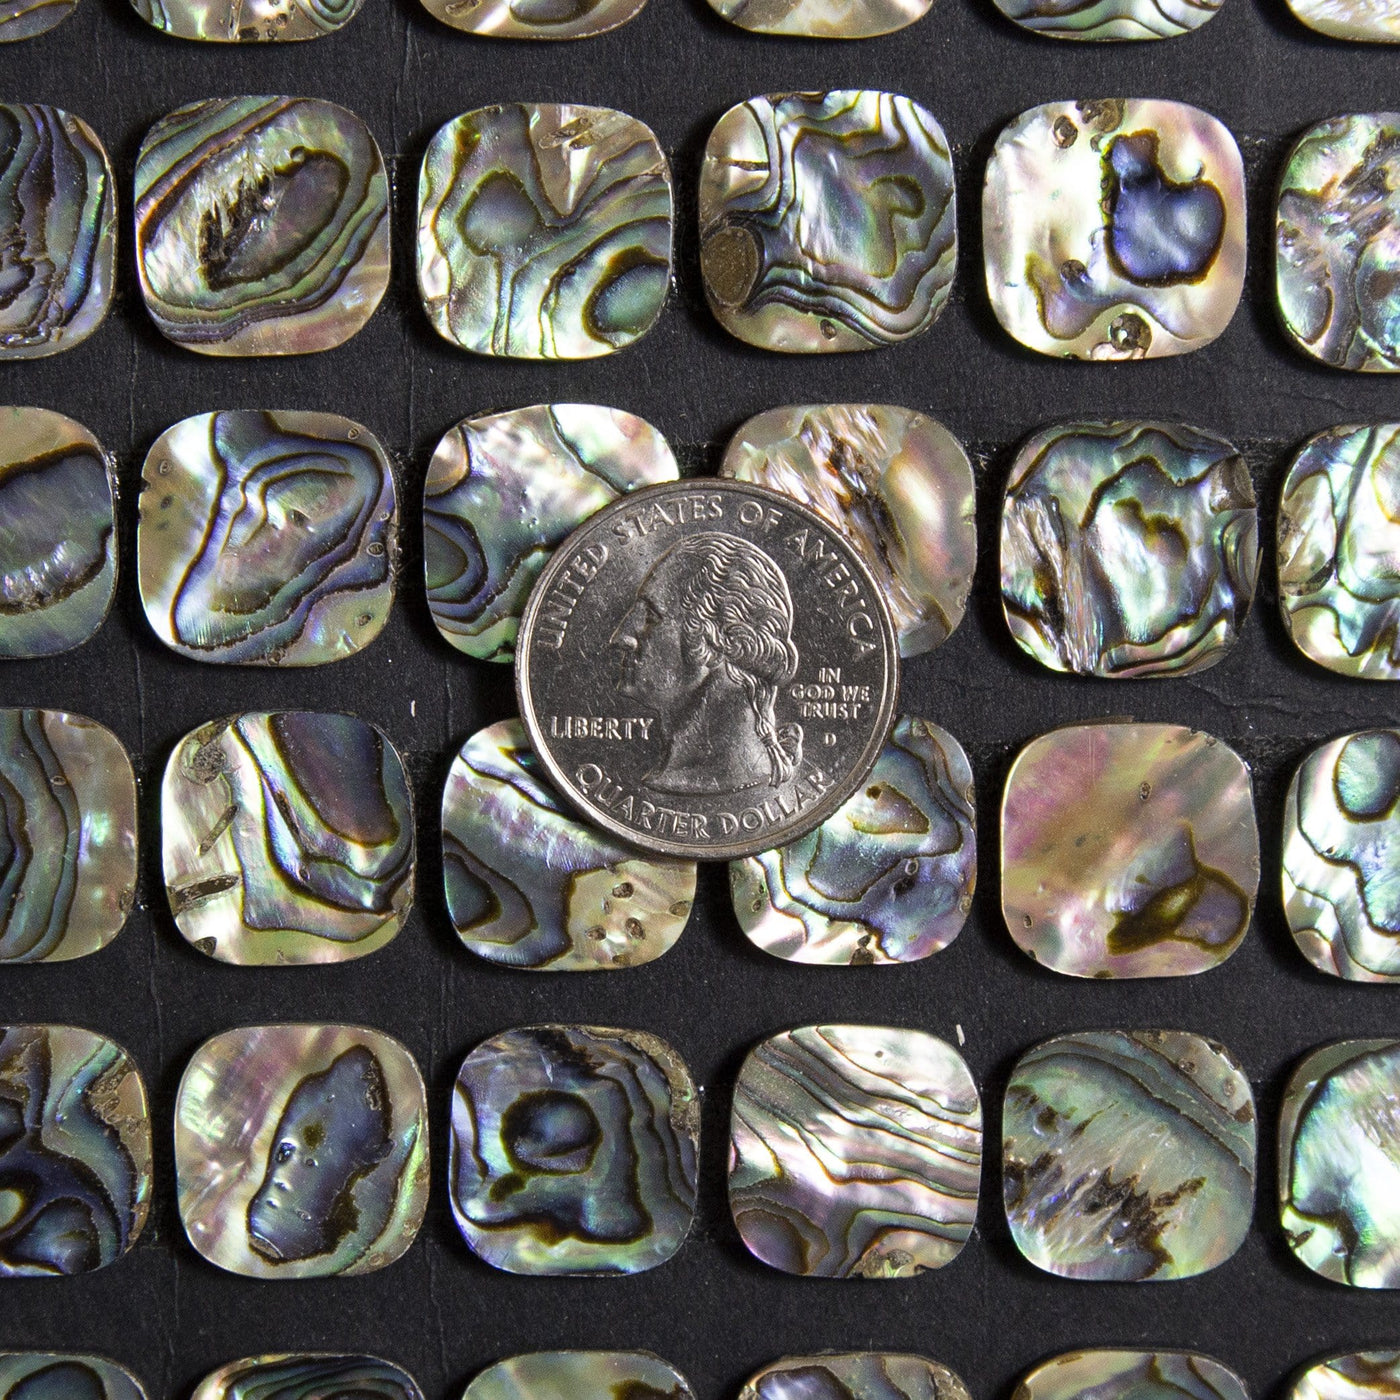 Multiple abalone squares shown with a quarter for size reference.